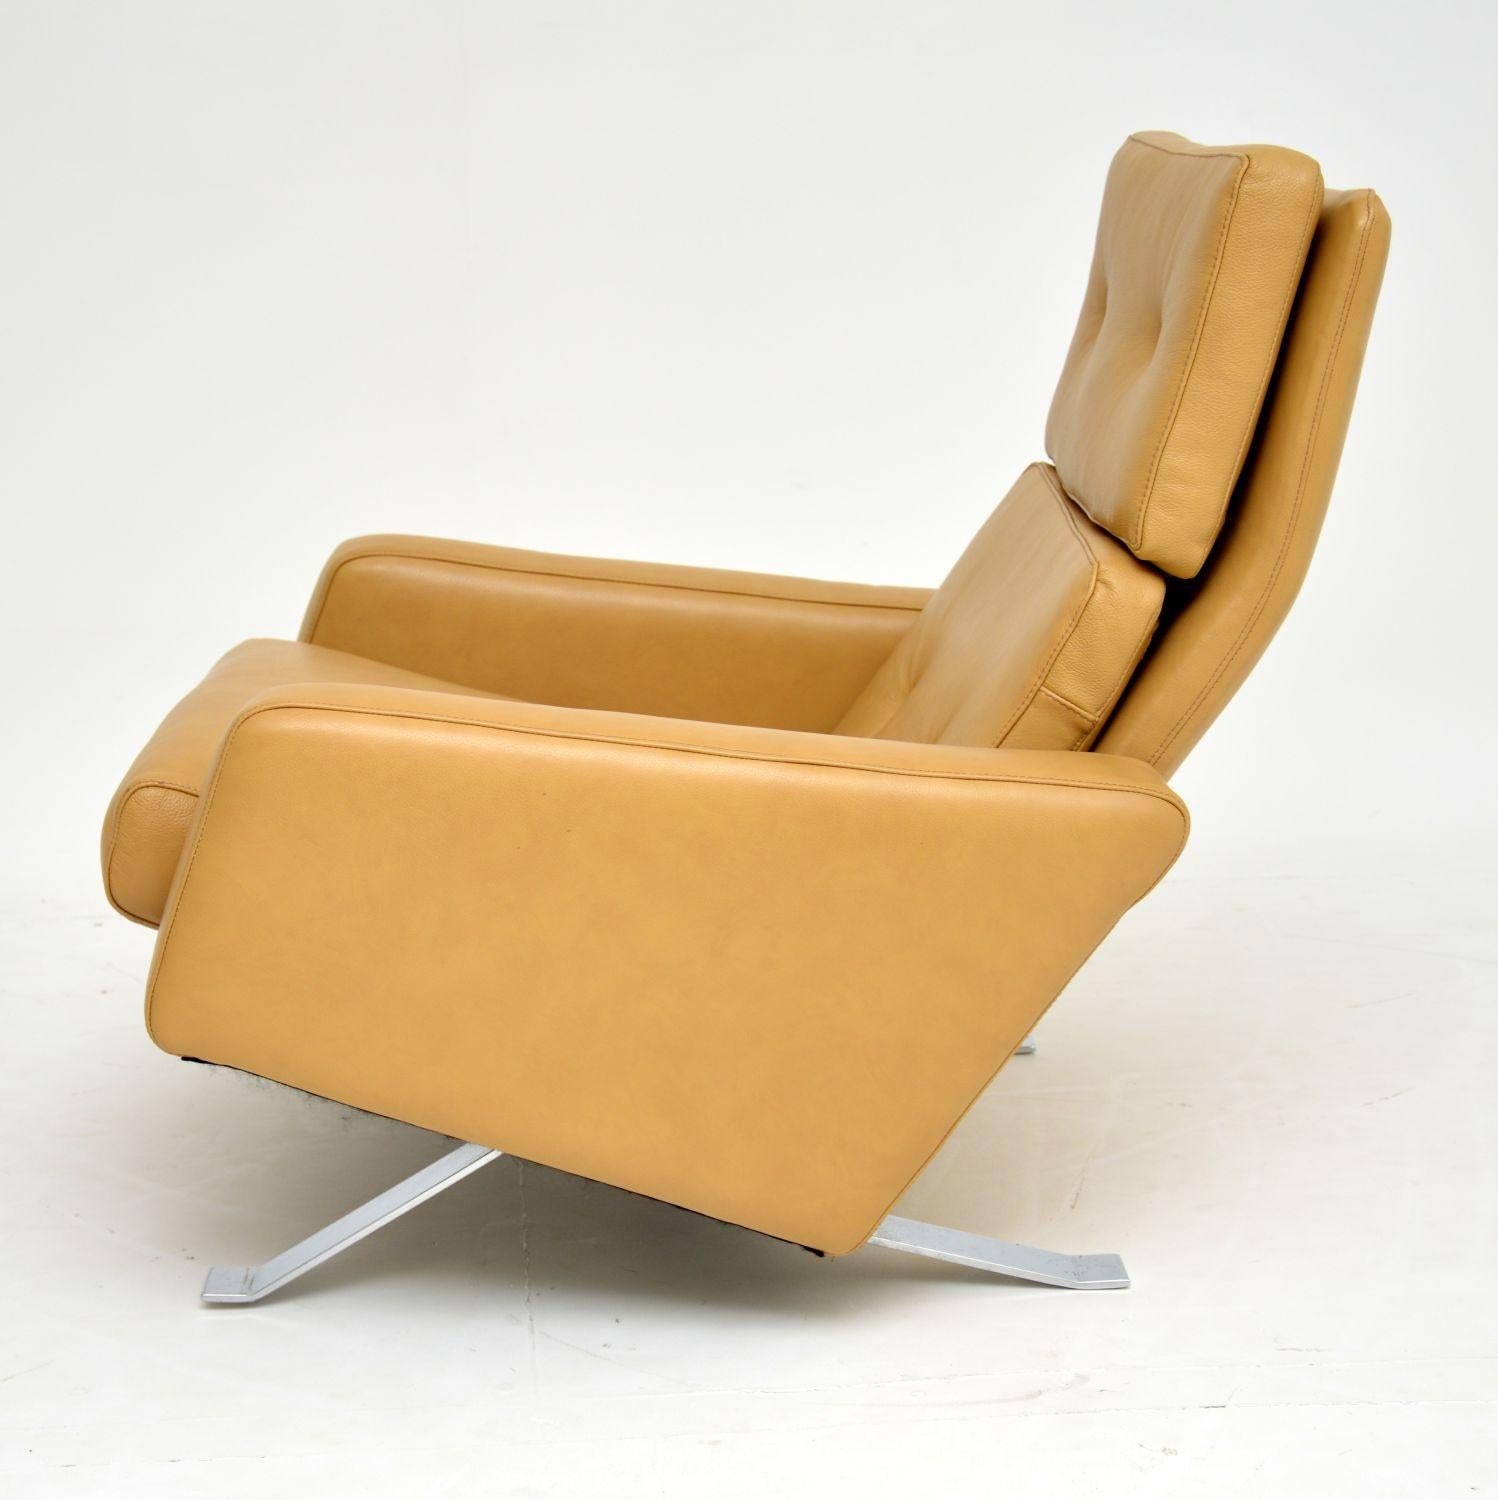 A stunning and iconic vintage leather armchair, designed by Robin Day for Hille, this is the “Leo” chair. This early model dates from the 1960s, we have had it completely re-upholstered in a beautiful tan leather. The chrome base is in fantastic